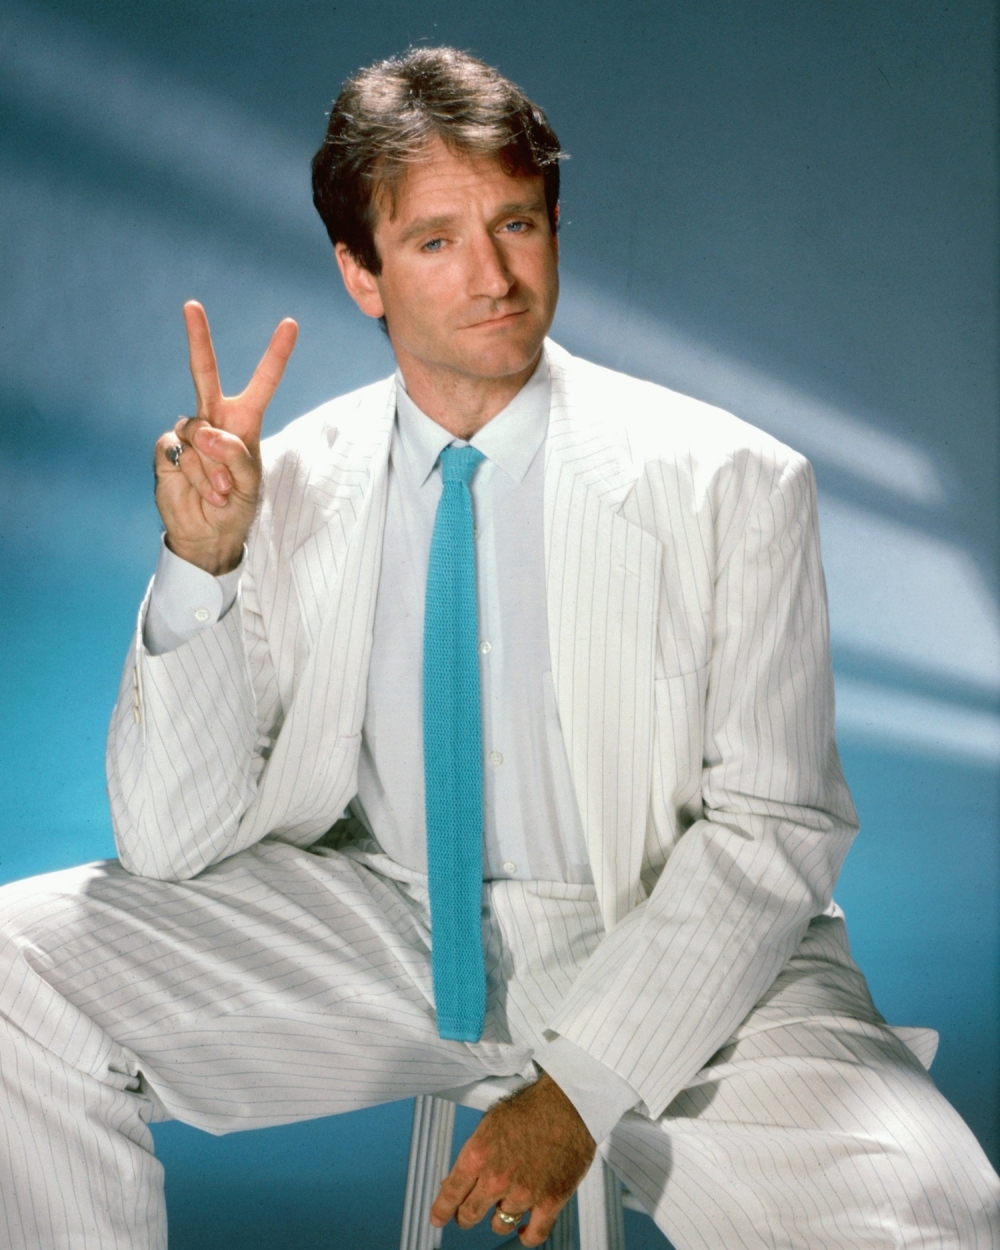 Robin Williams photo 7 of 34 pics, wallpaper - photo #235105 - ThePlace2